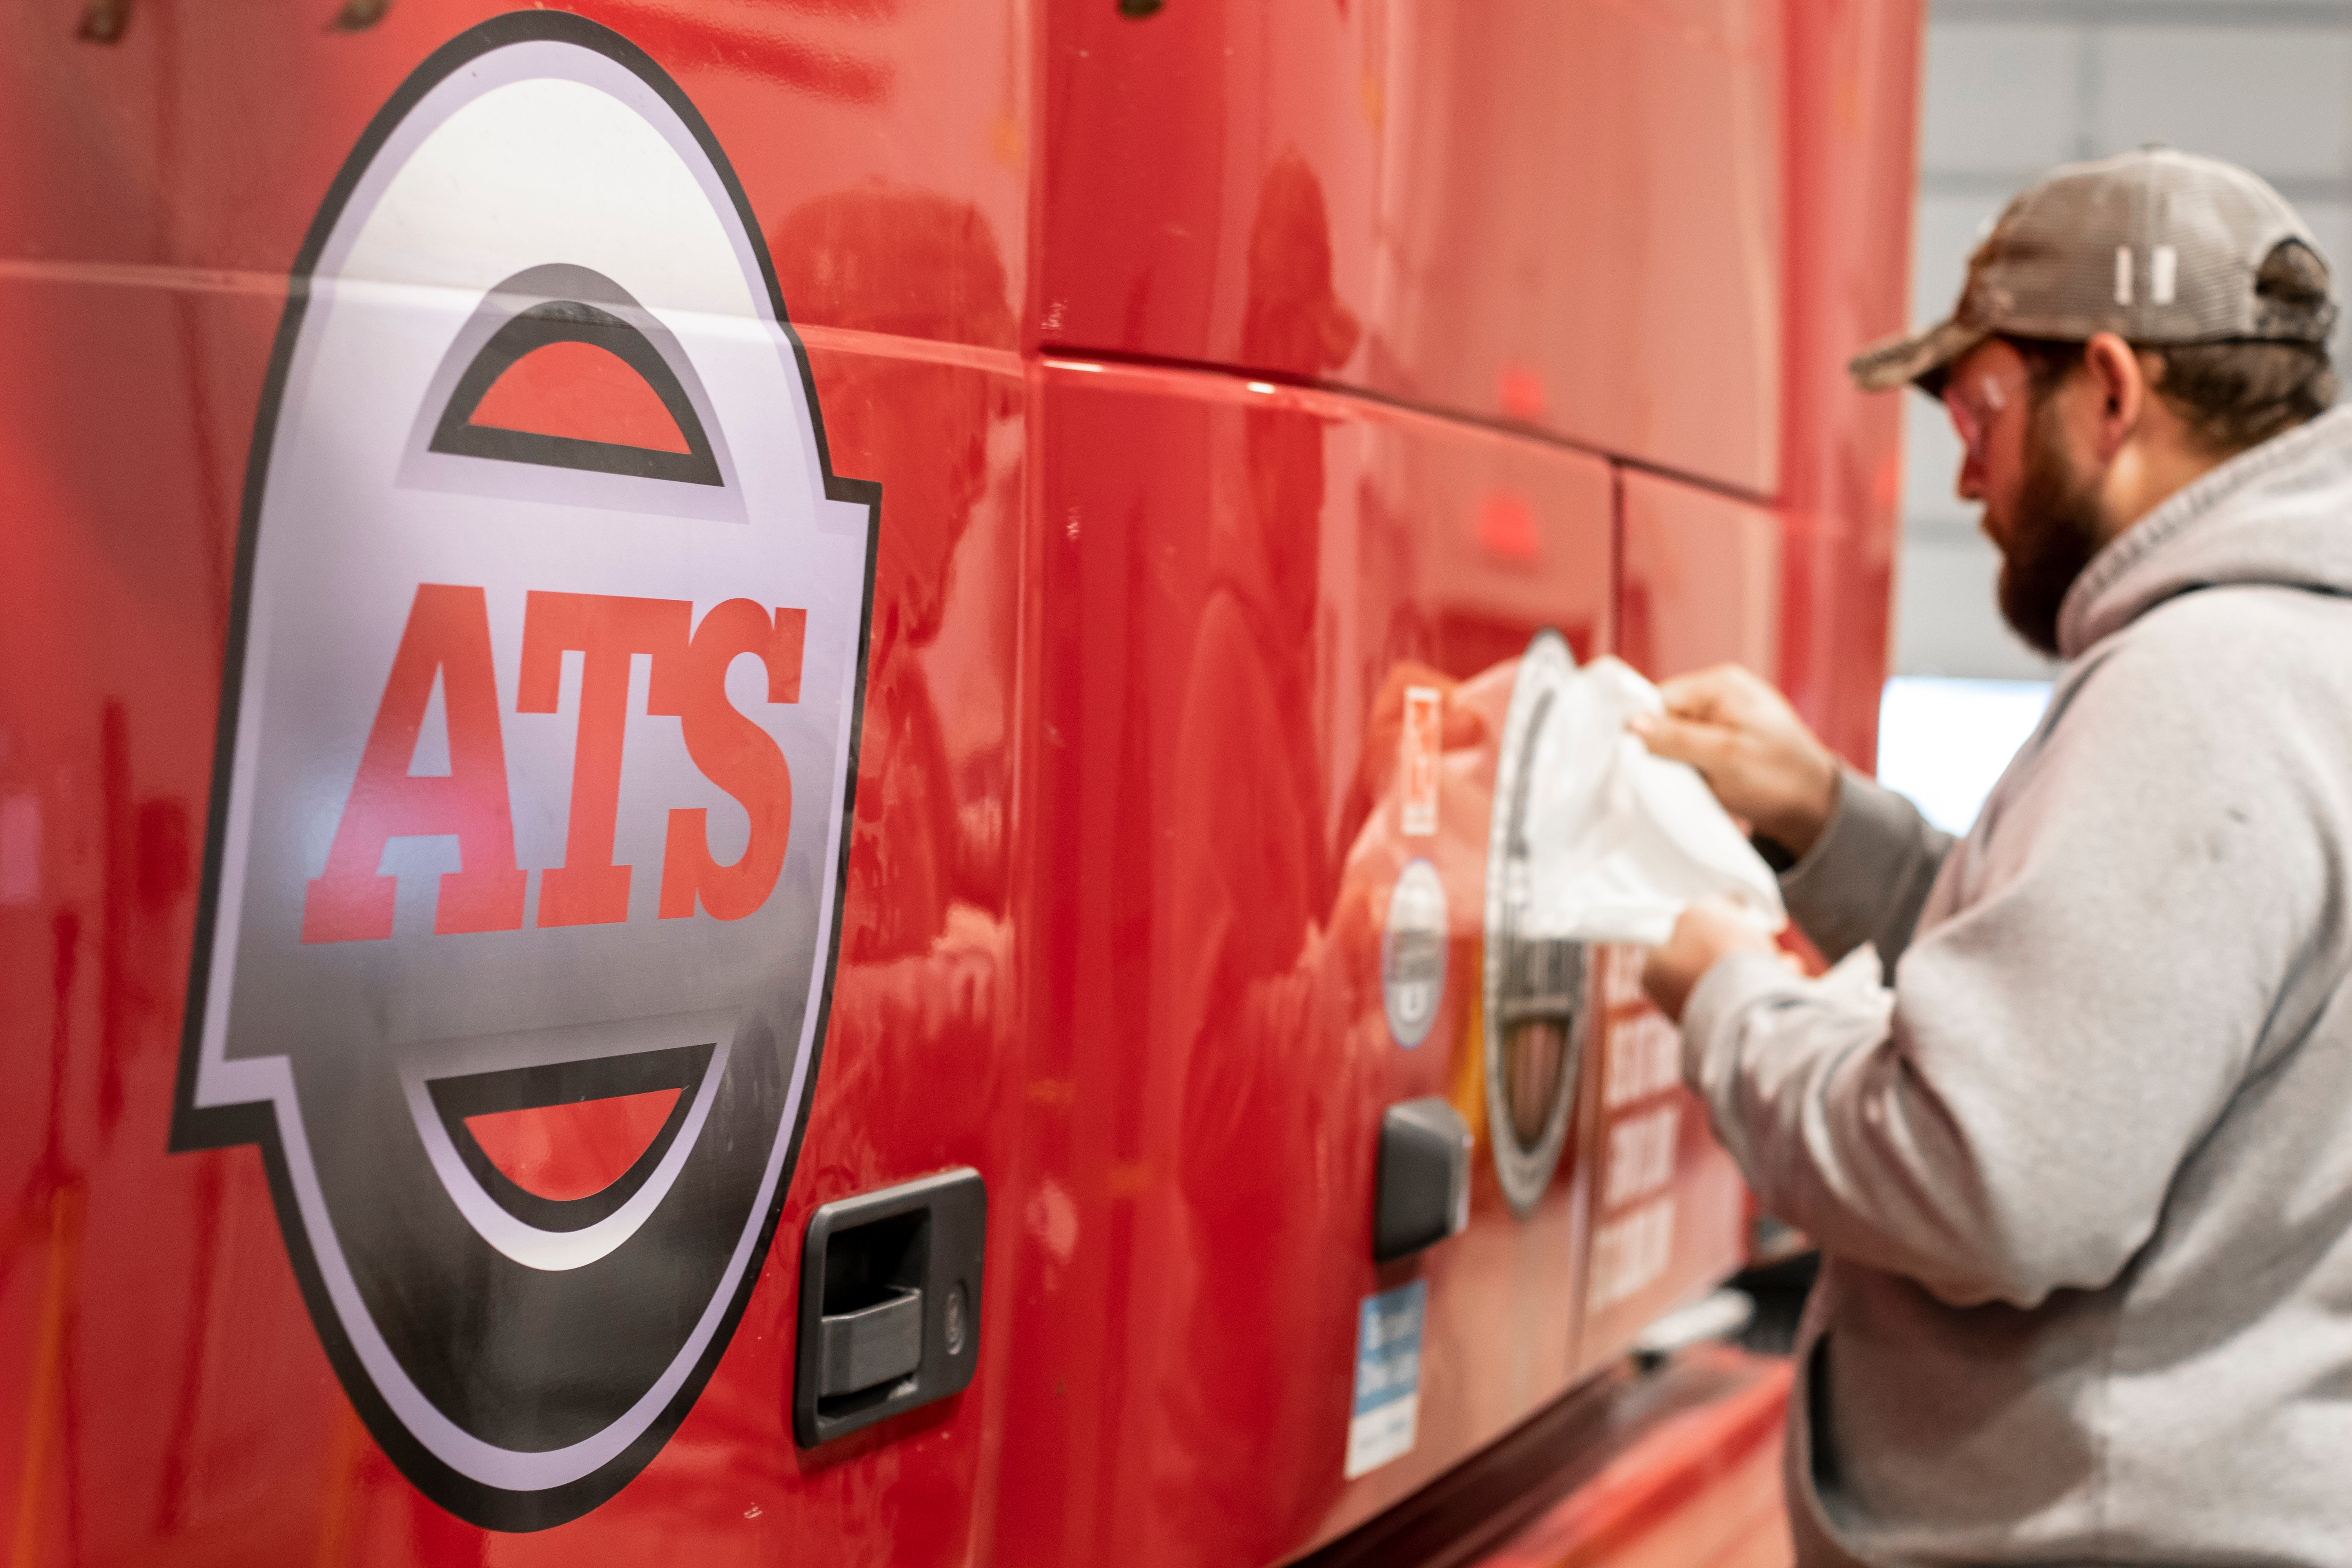 ATS military decal being applied to truck